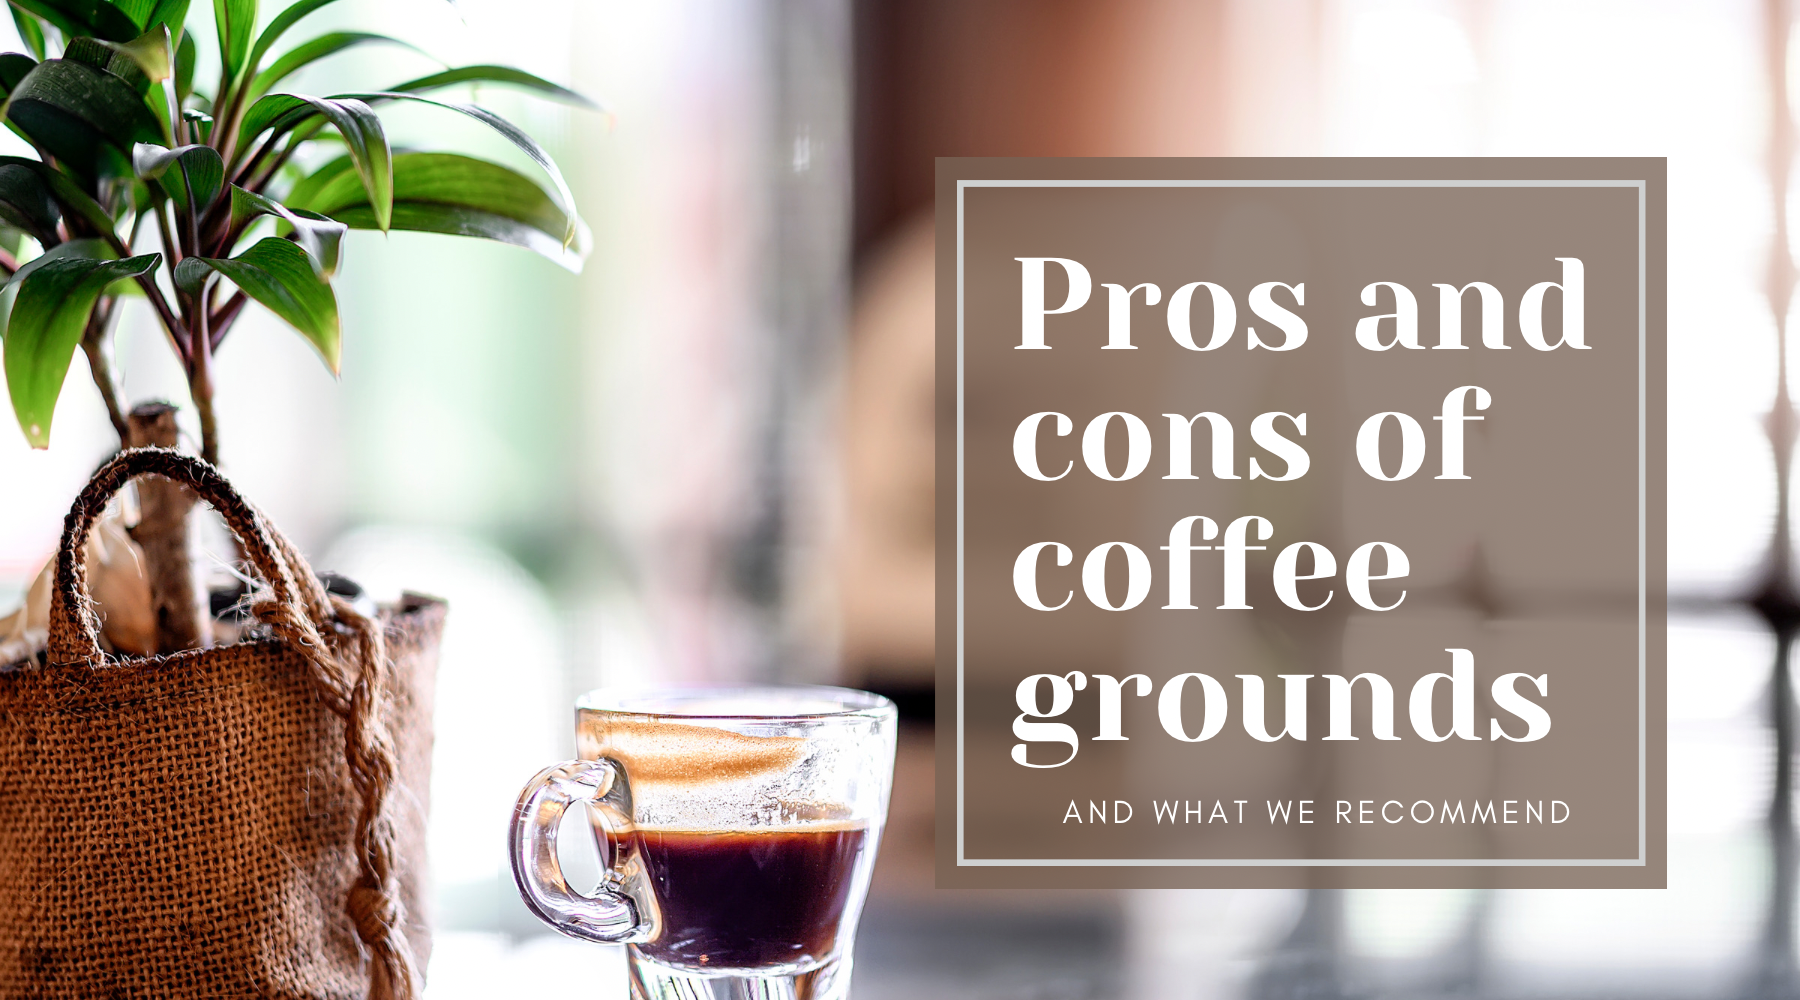 Brewing Green: Exploring the Pros and Cons of Using Coffee Grounds in Houseplants